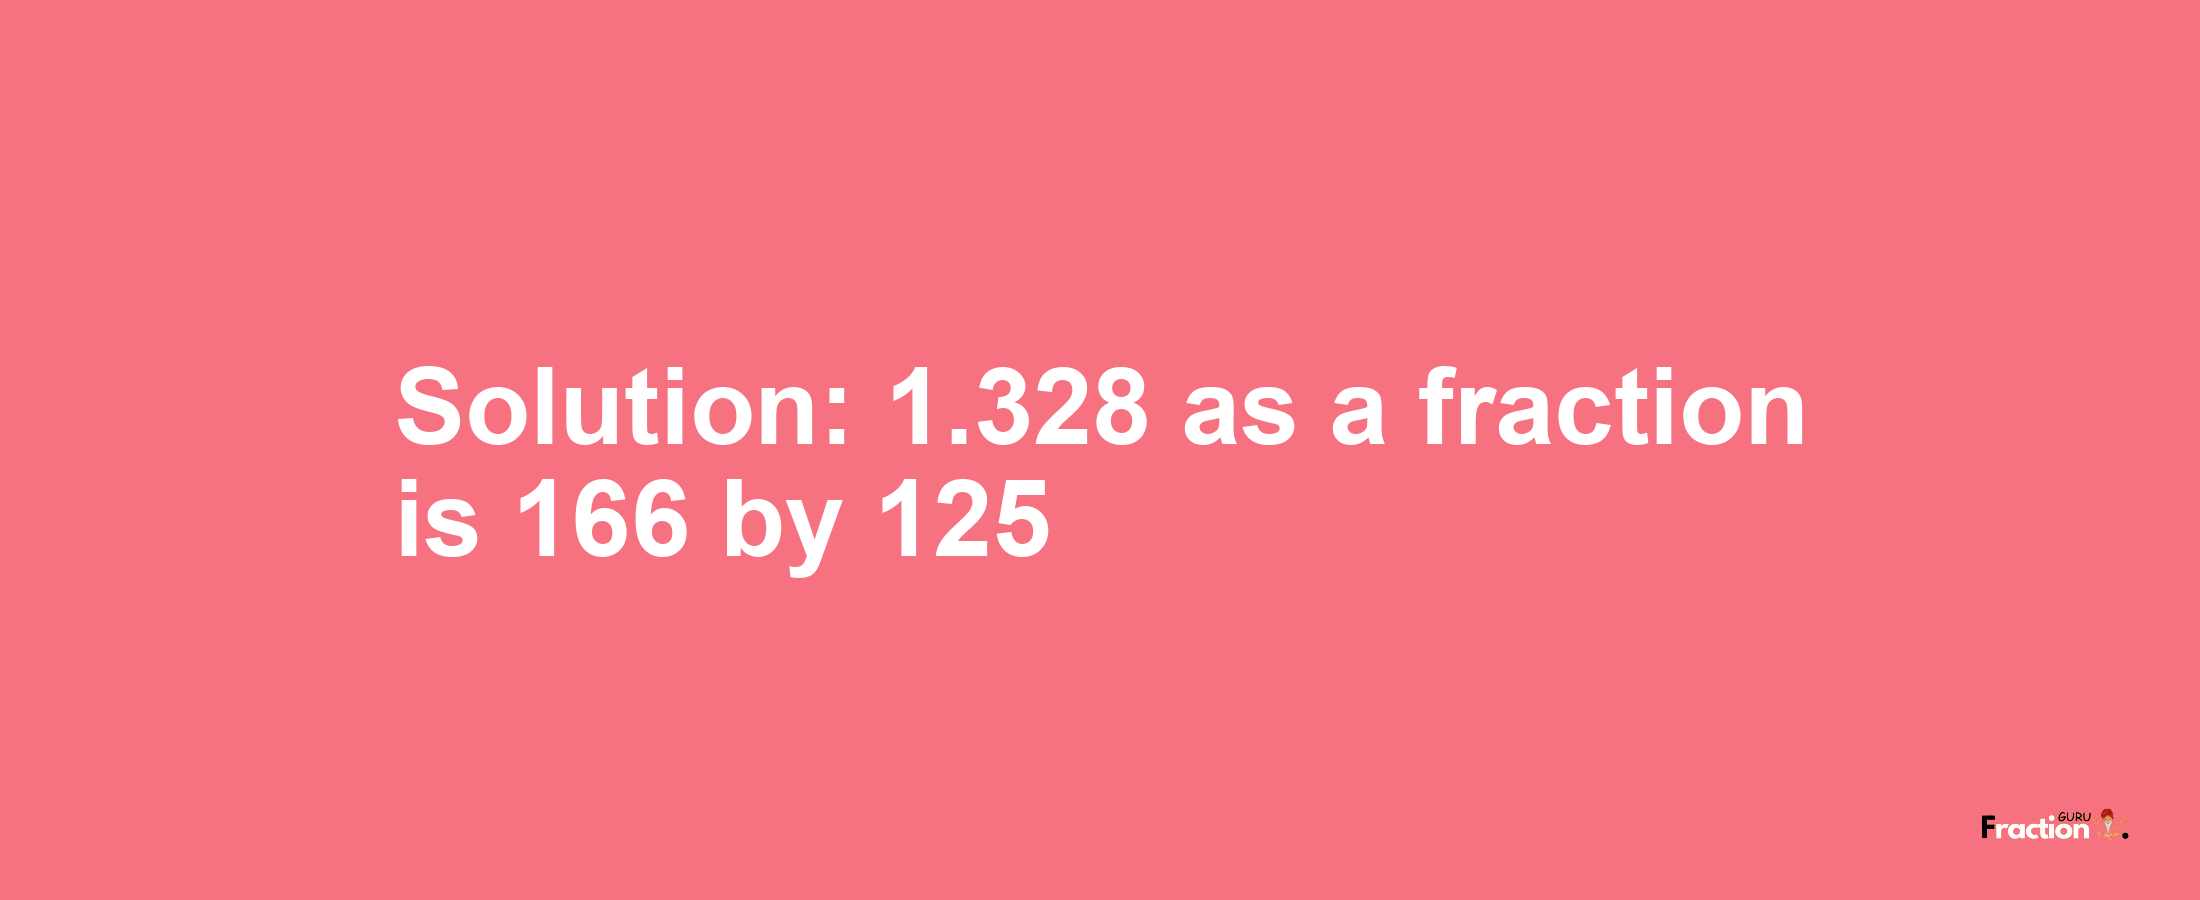 Solution:1.328 as a fraction is 166/125